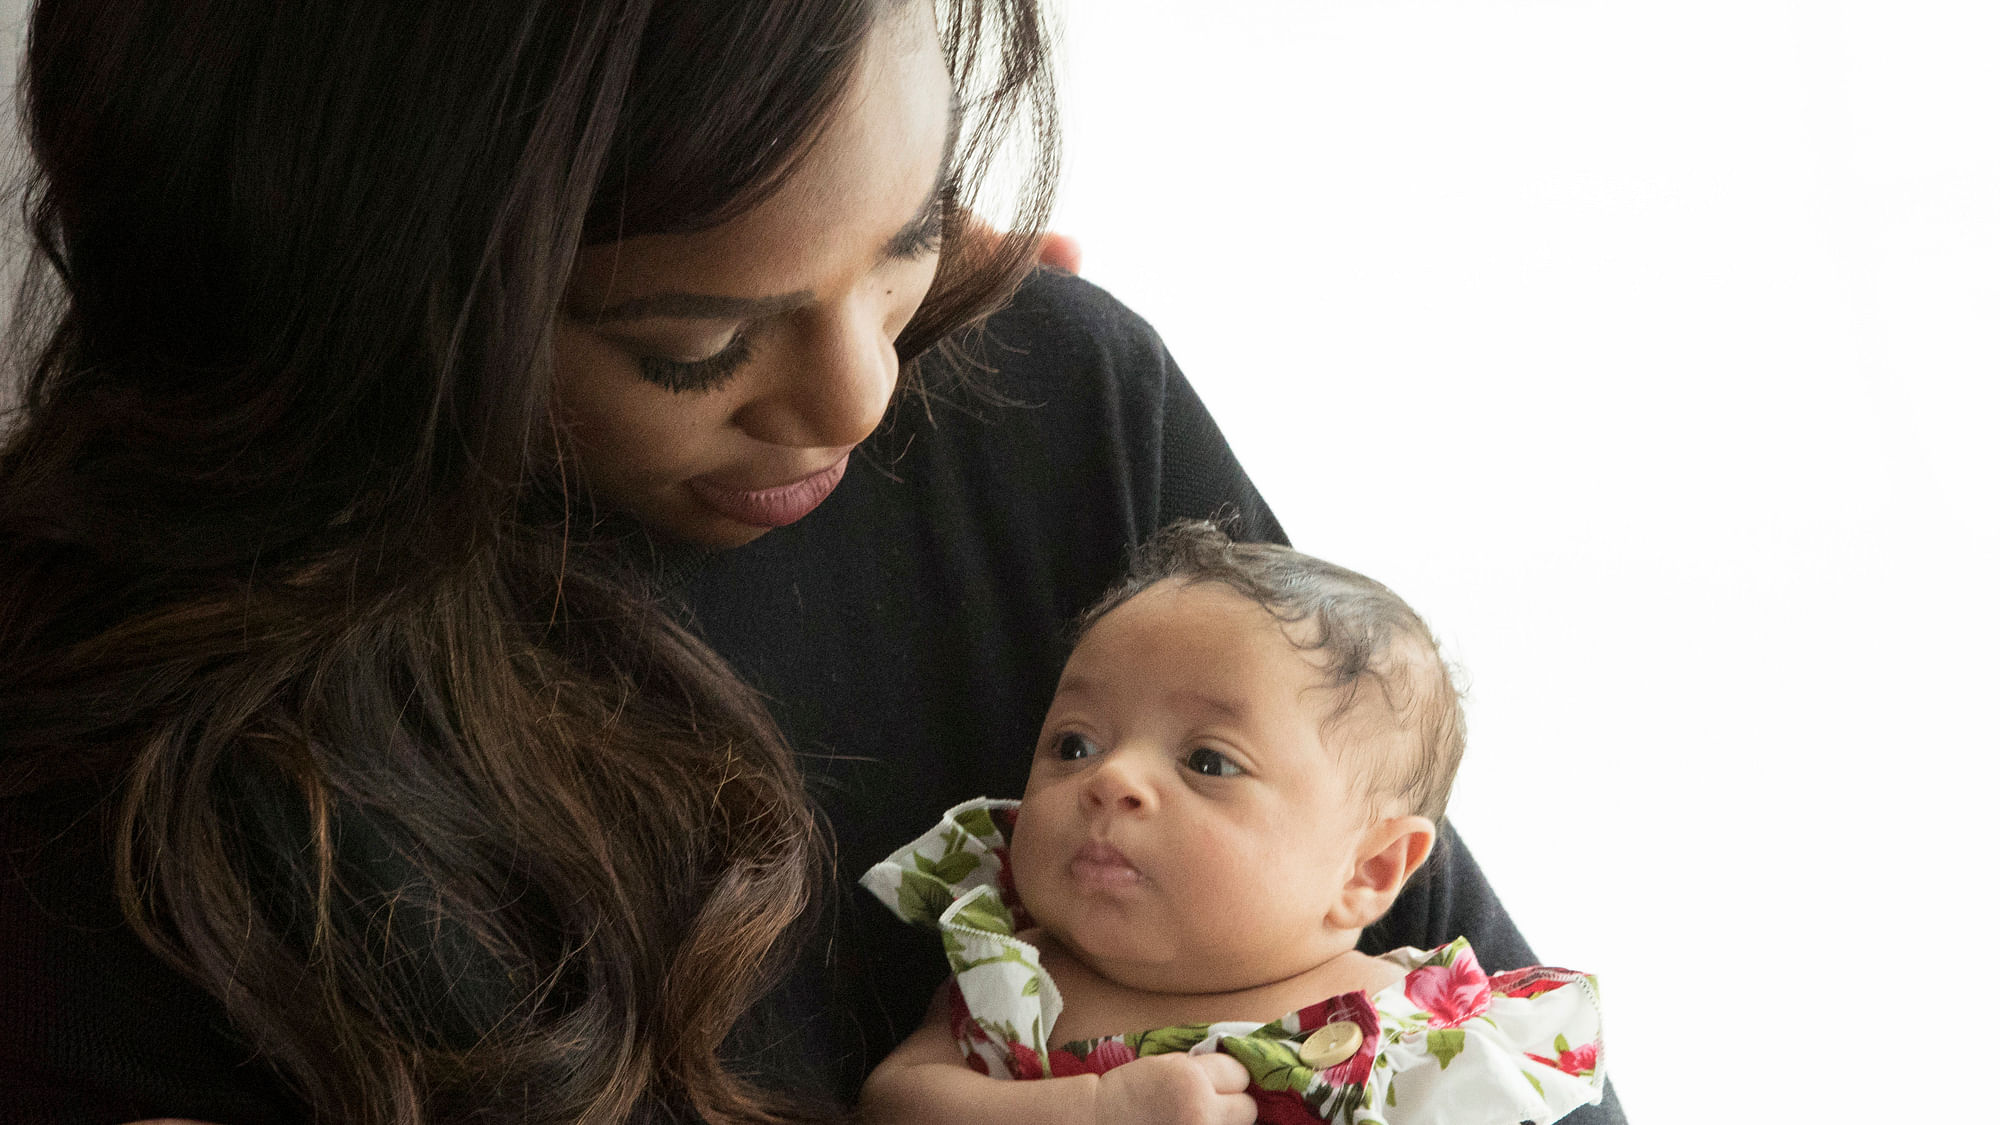 Serena Williams holds her daughter, Alexis Olympia Ohanion Jr., in a scene from the HBO’s “Being Serena,” a five-part documentary series.